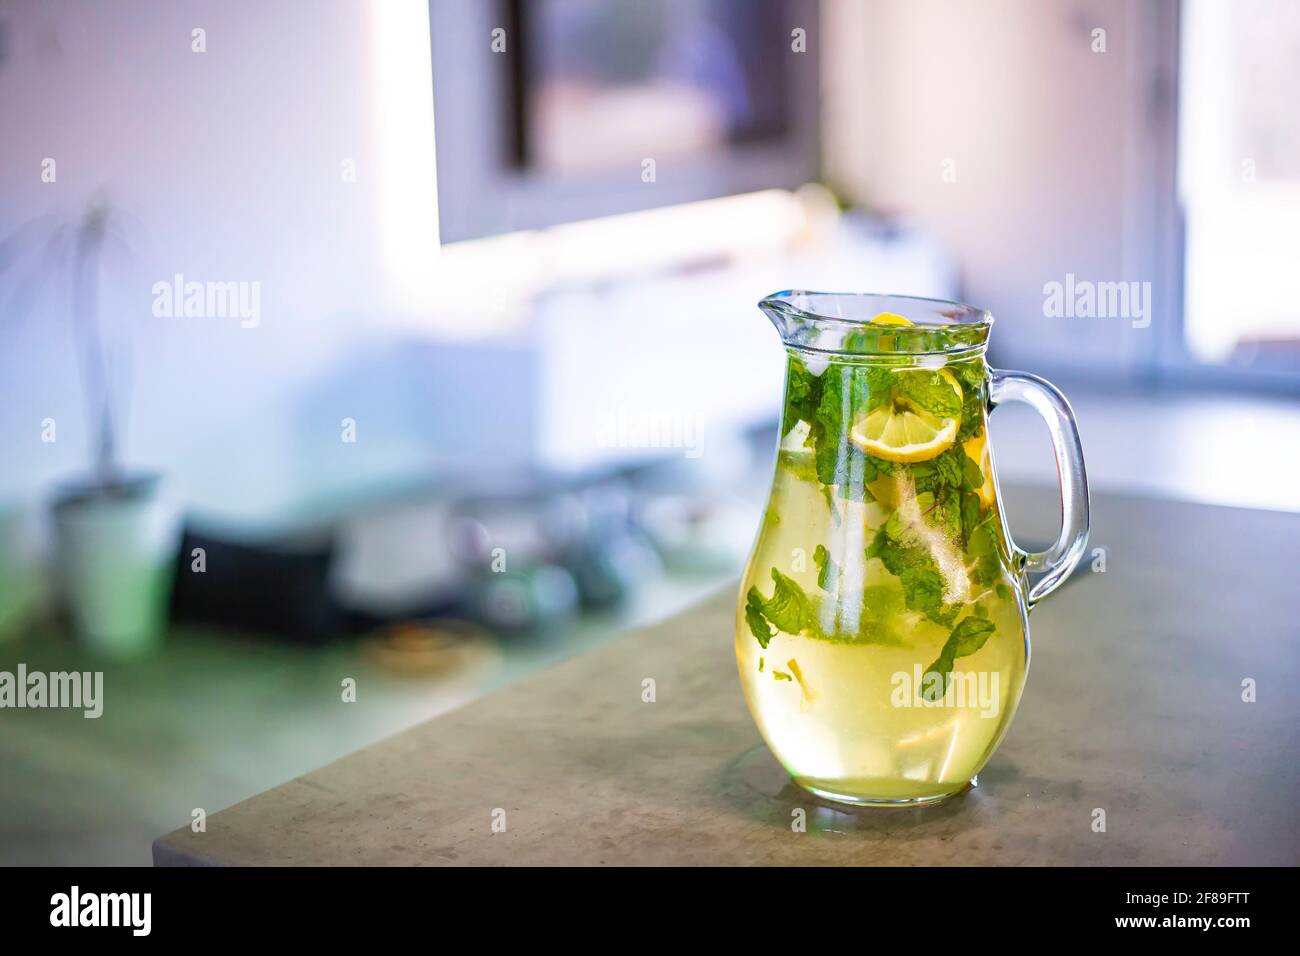 Ice cold lemonade with mint and lemon. The pitcher is standing on the kitchen counter. Background is blurred. Stock Photo